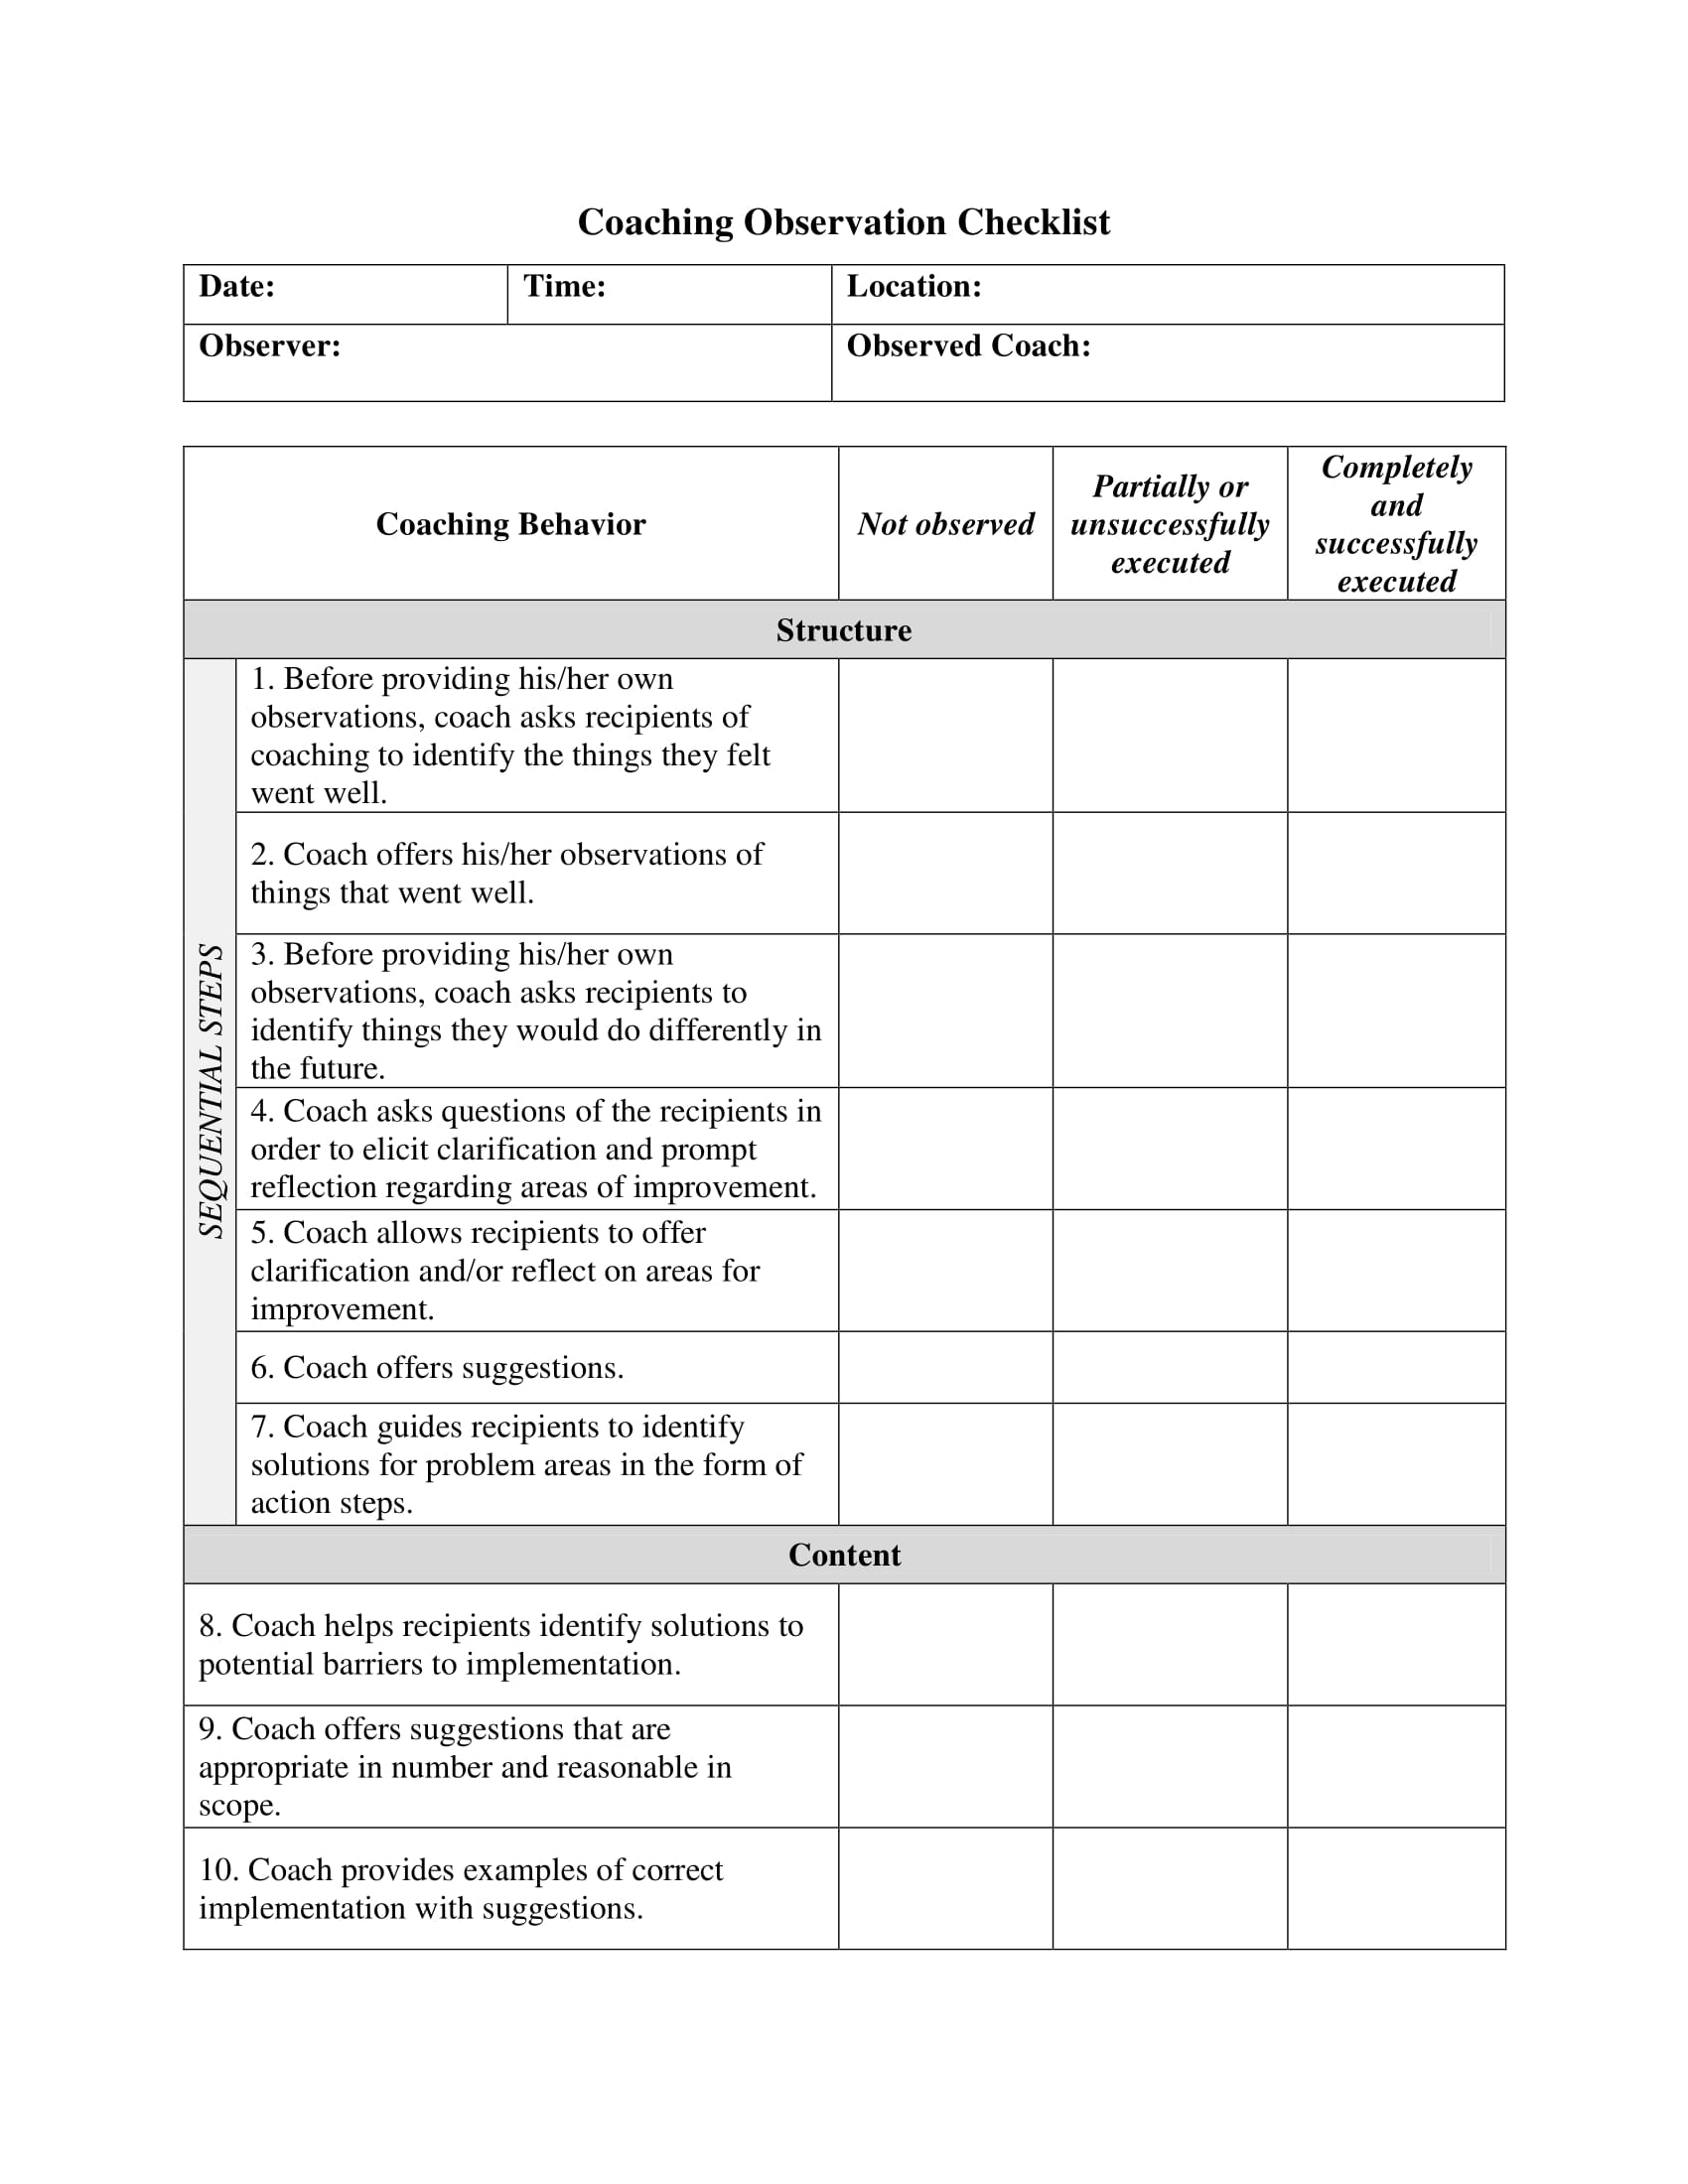 coaching observation checklist form 1